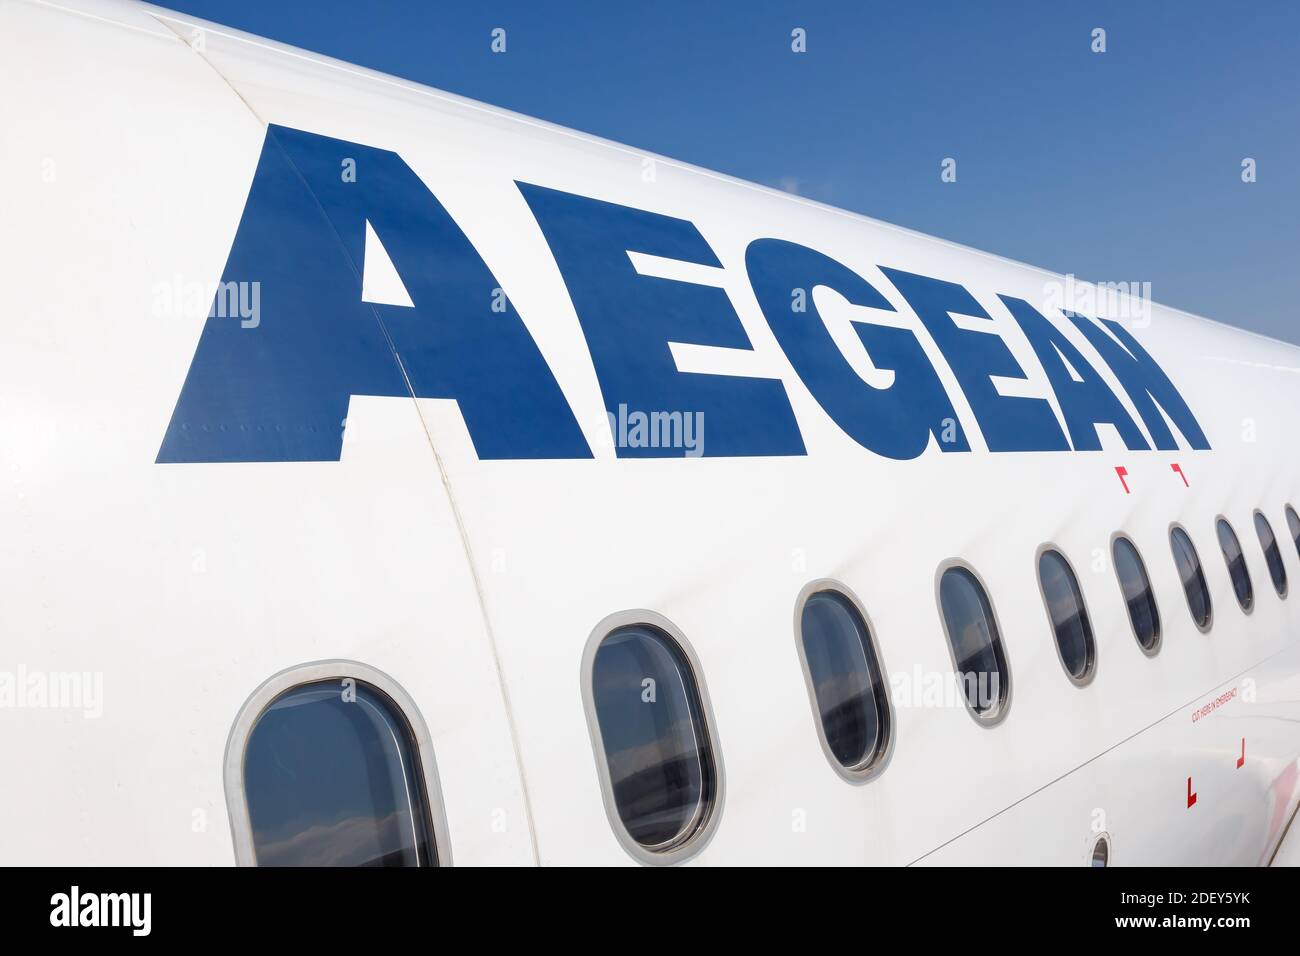 Heraklion, Greece - September 14, 2018: Aegean Airlines Logo Airbus airplane at Heraklion Airport (HER) in Greece. Stock Photo